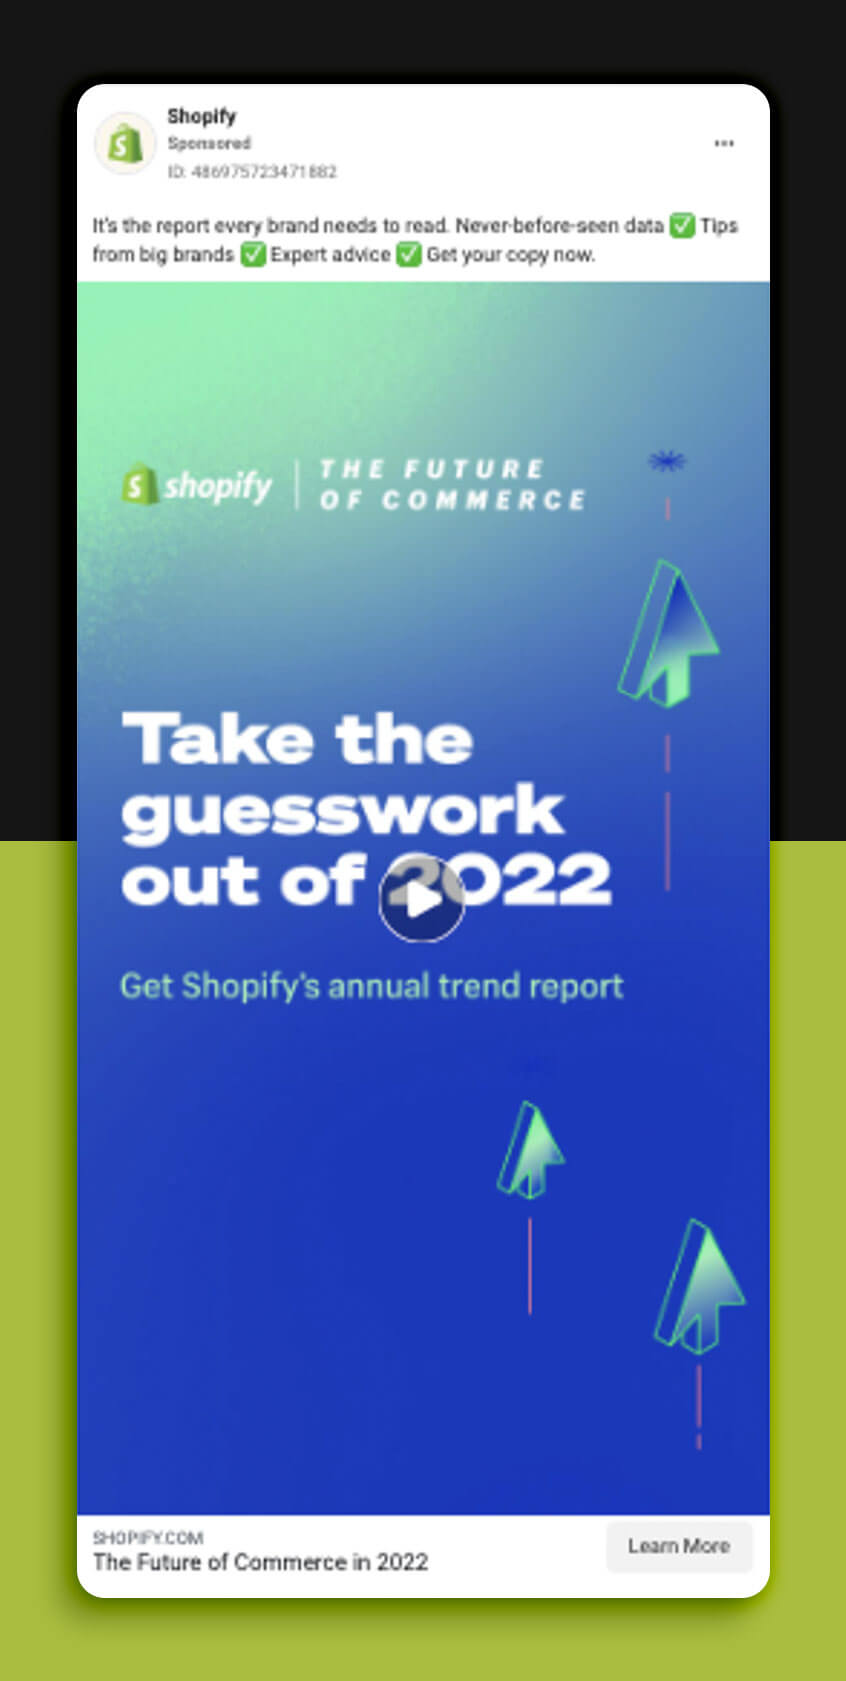 Most Successful Facebook Ads: Shopify and Never Before Seen Data